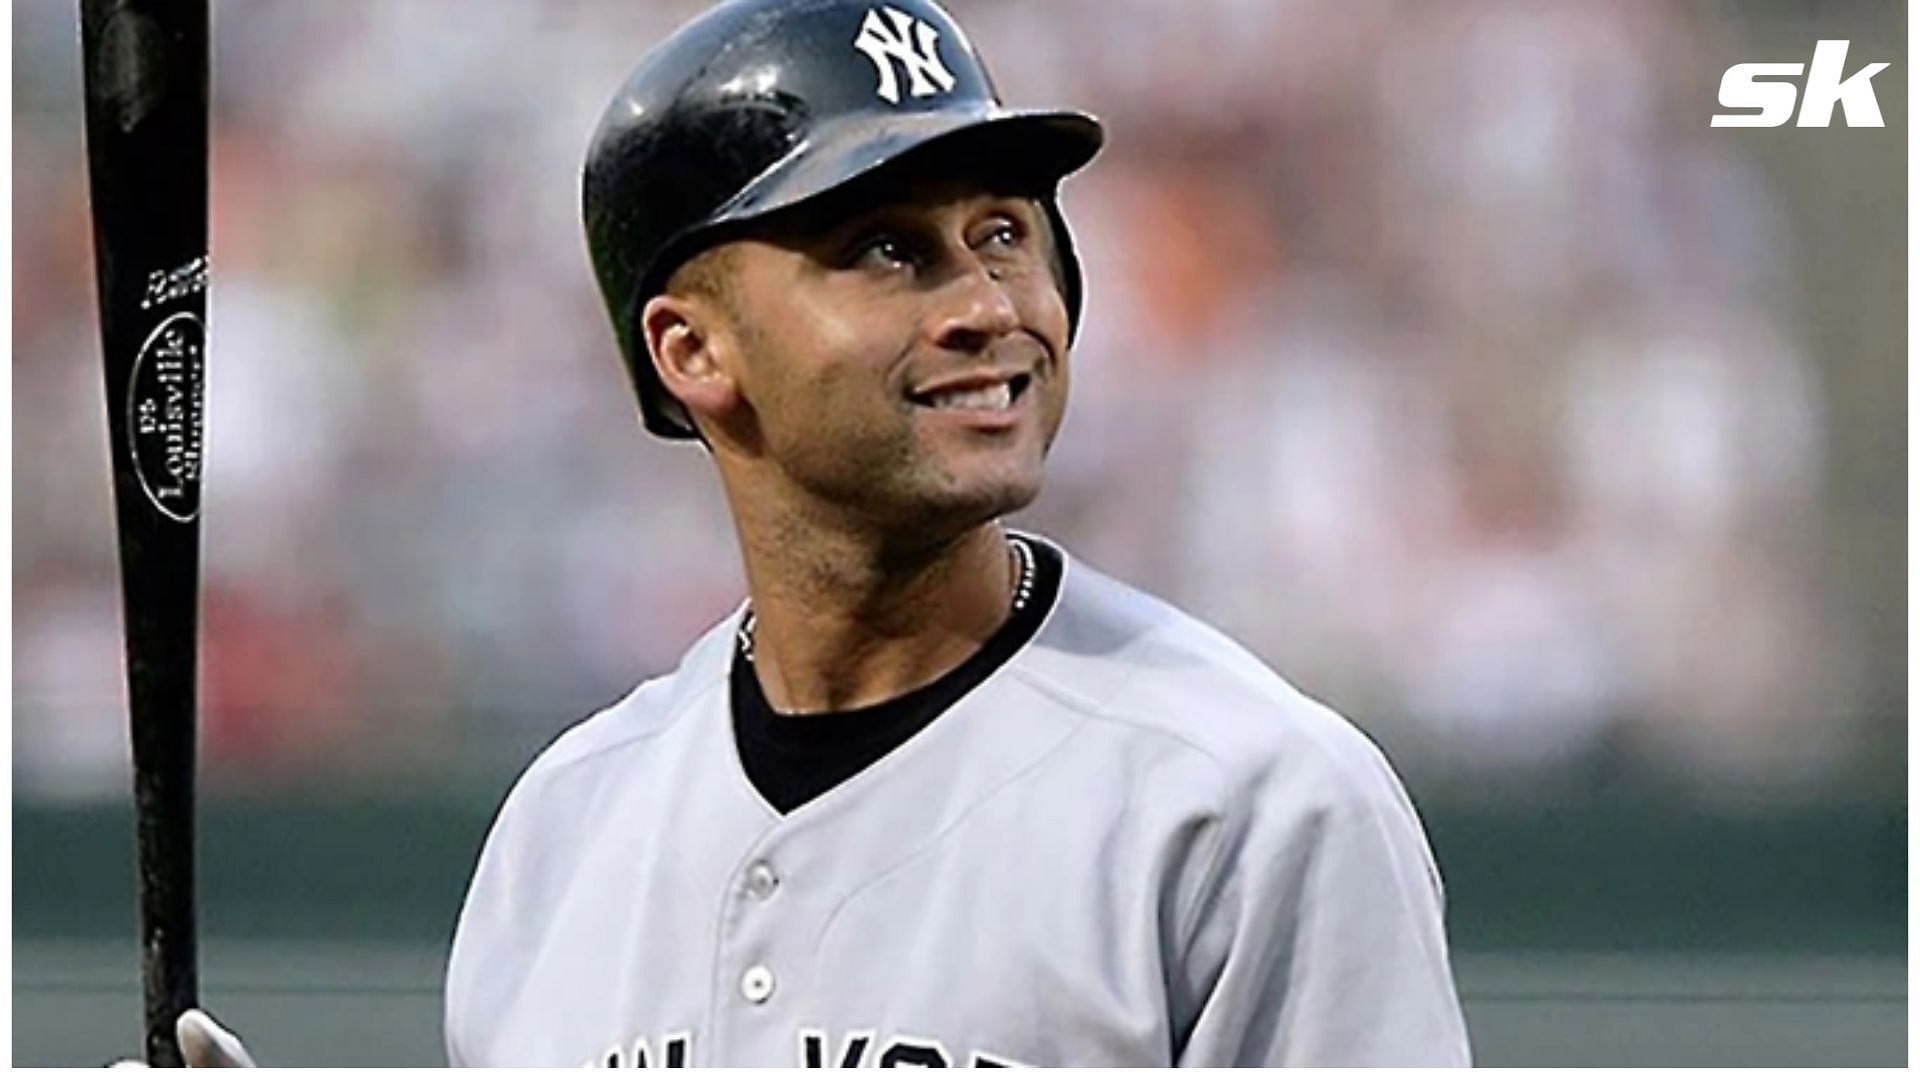 Derek Jeter: I went to the bathroom, and the phone rang, my mom answered  it  she said, 'The Yankees are on the phone